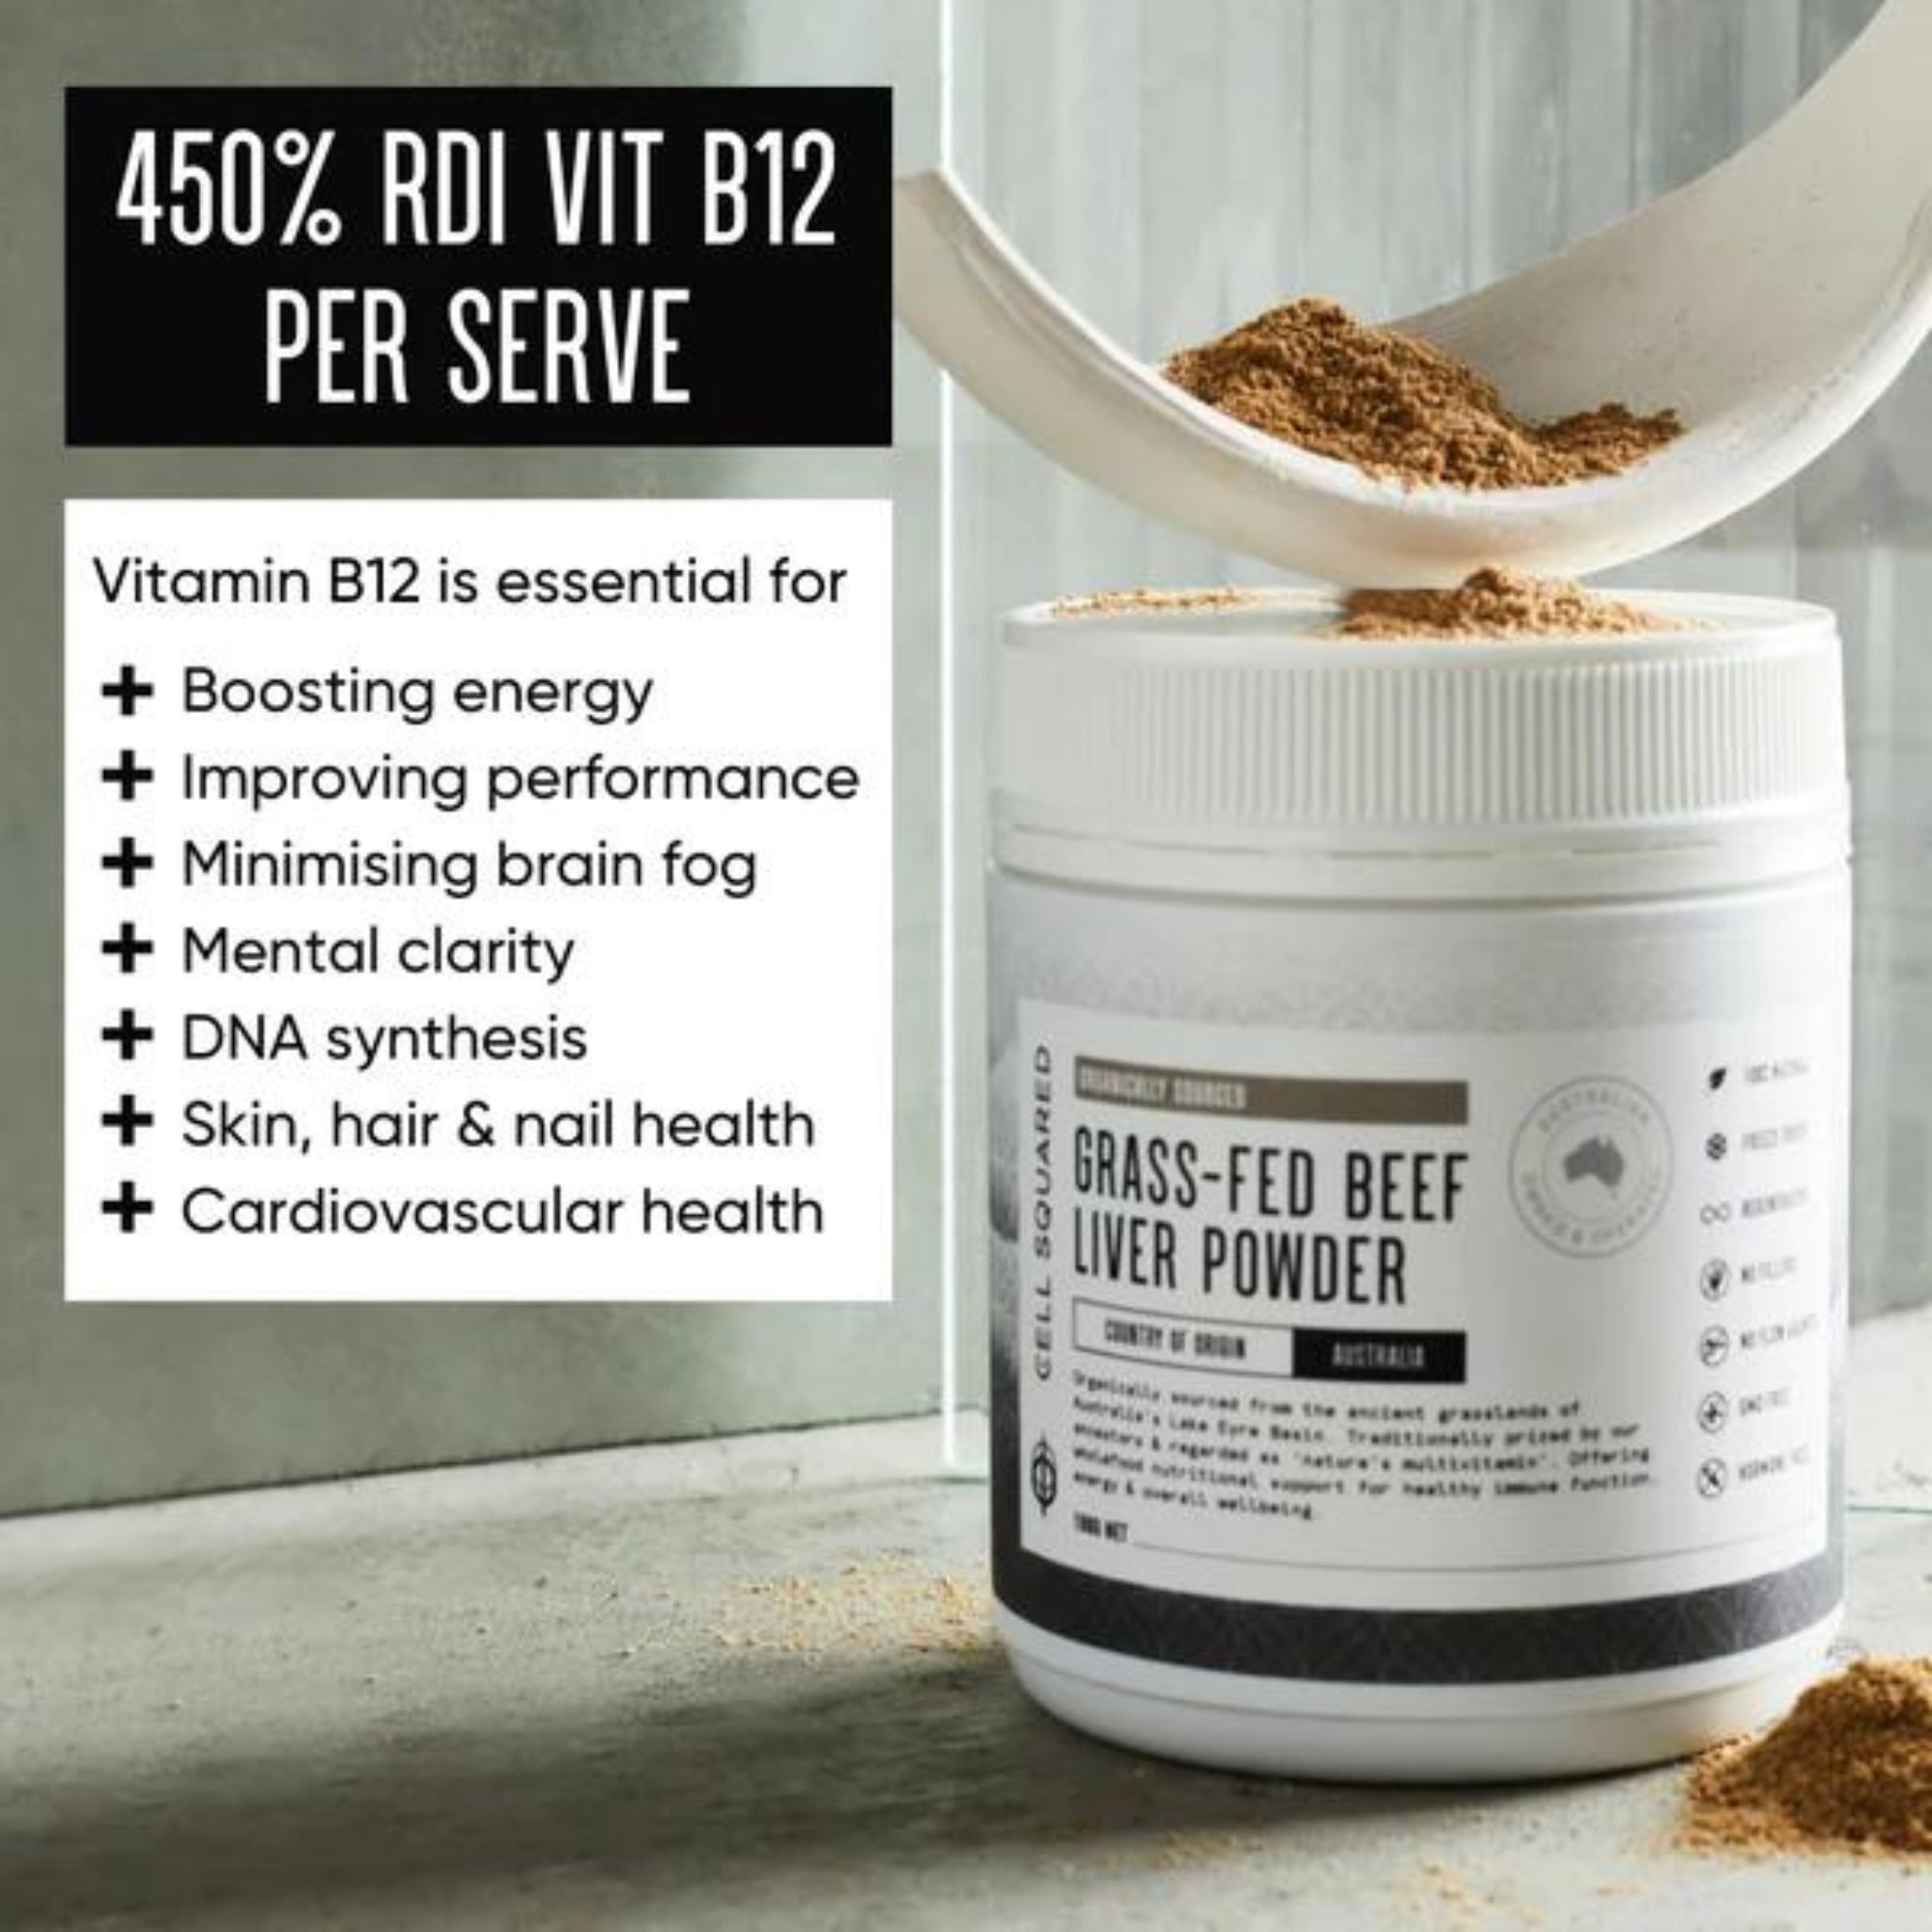 ACO Certified Organic Grass Fed Beef Liver Powder